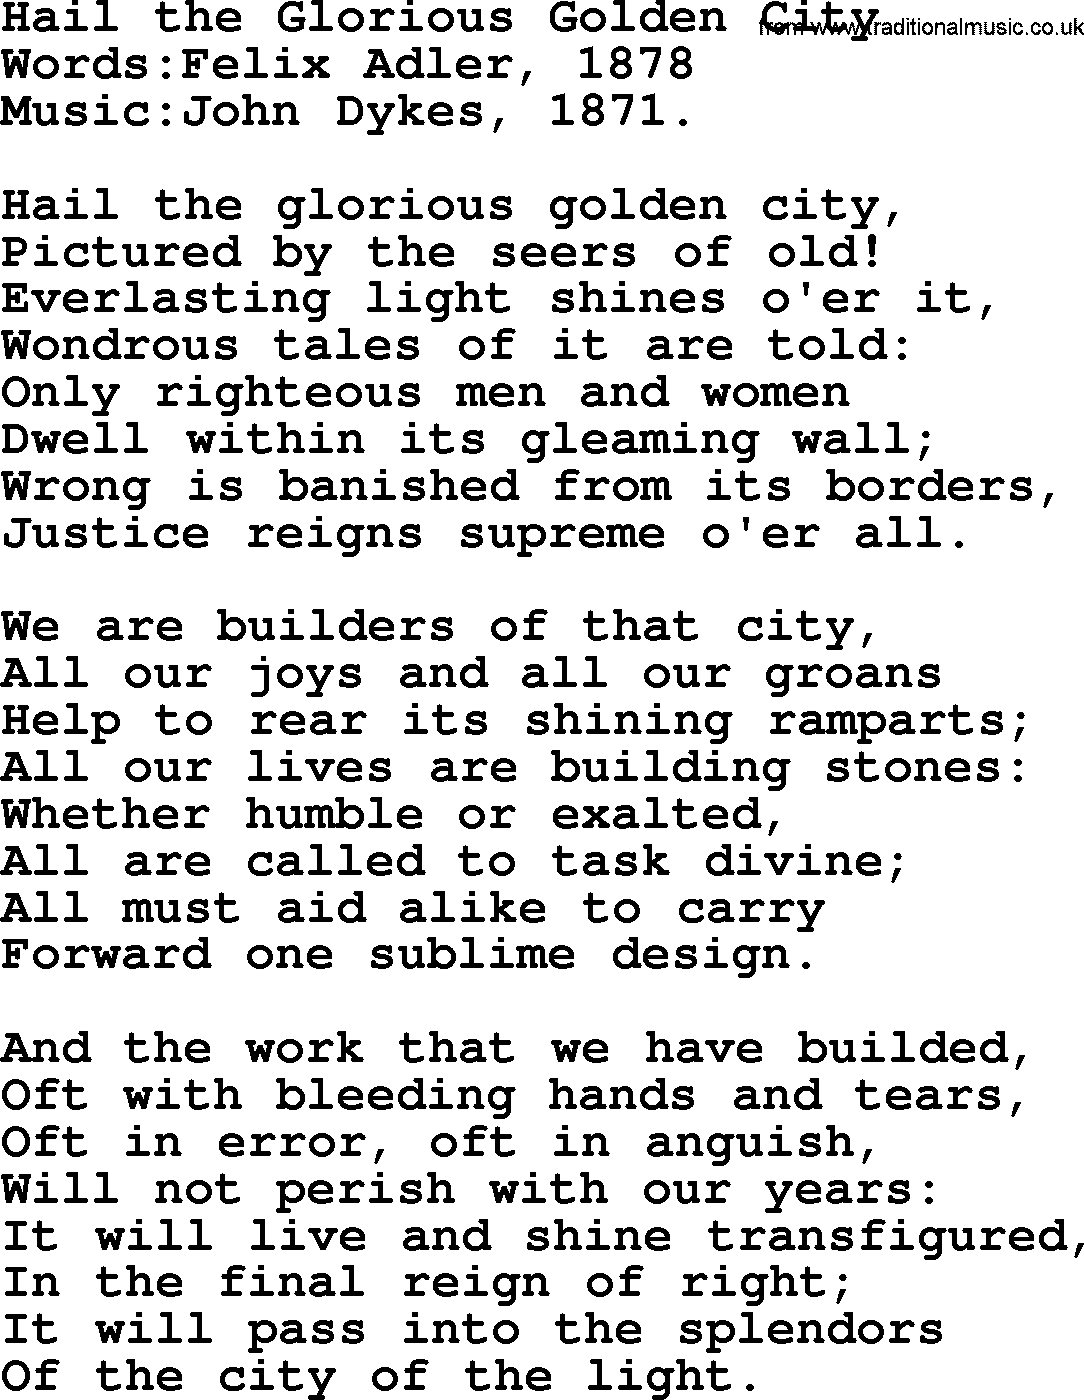 Songs and Hymns about Heaven: Hail The Glorious Golden City lyrics with PDF